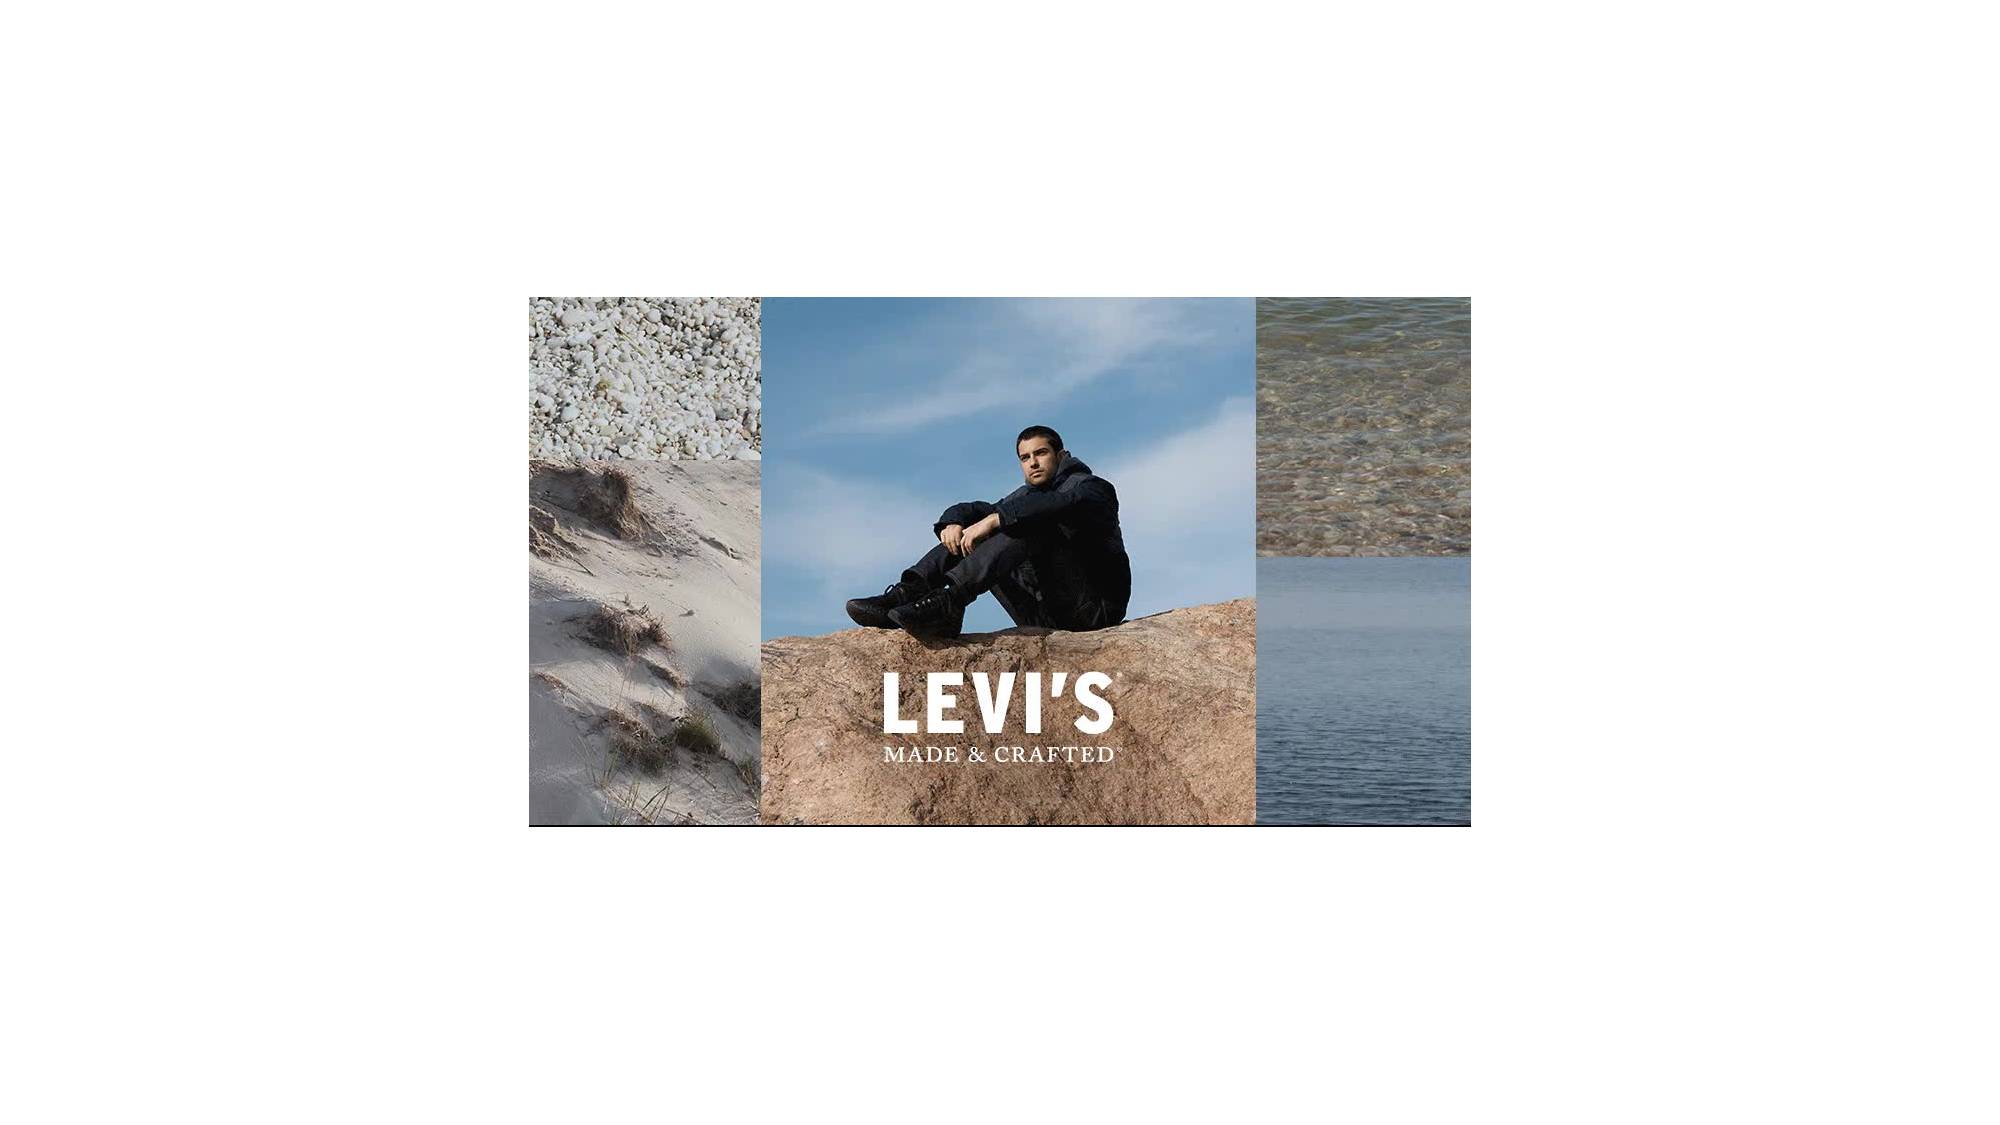 A GIF with the first image of a woman wearing a long Levi's Made & Crafted denim sherpa jacket standing in front of a grassy mountain and the second image of a man sitting on a boulder wearing black denim jeans and black jacket, bordered by texture from nature.